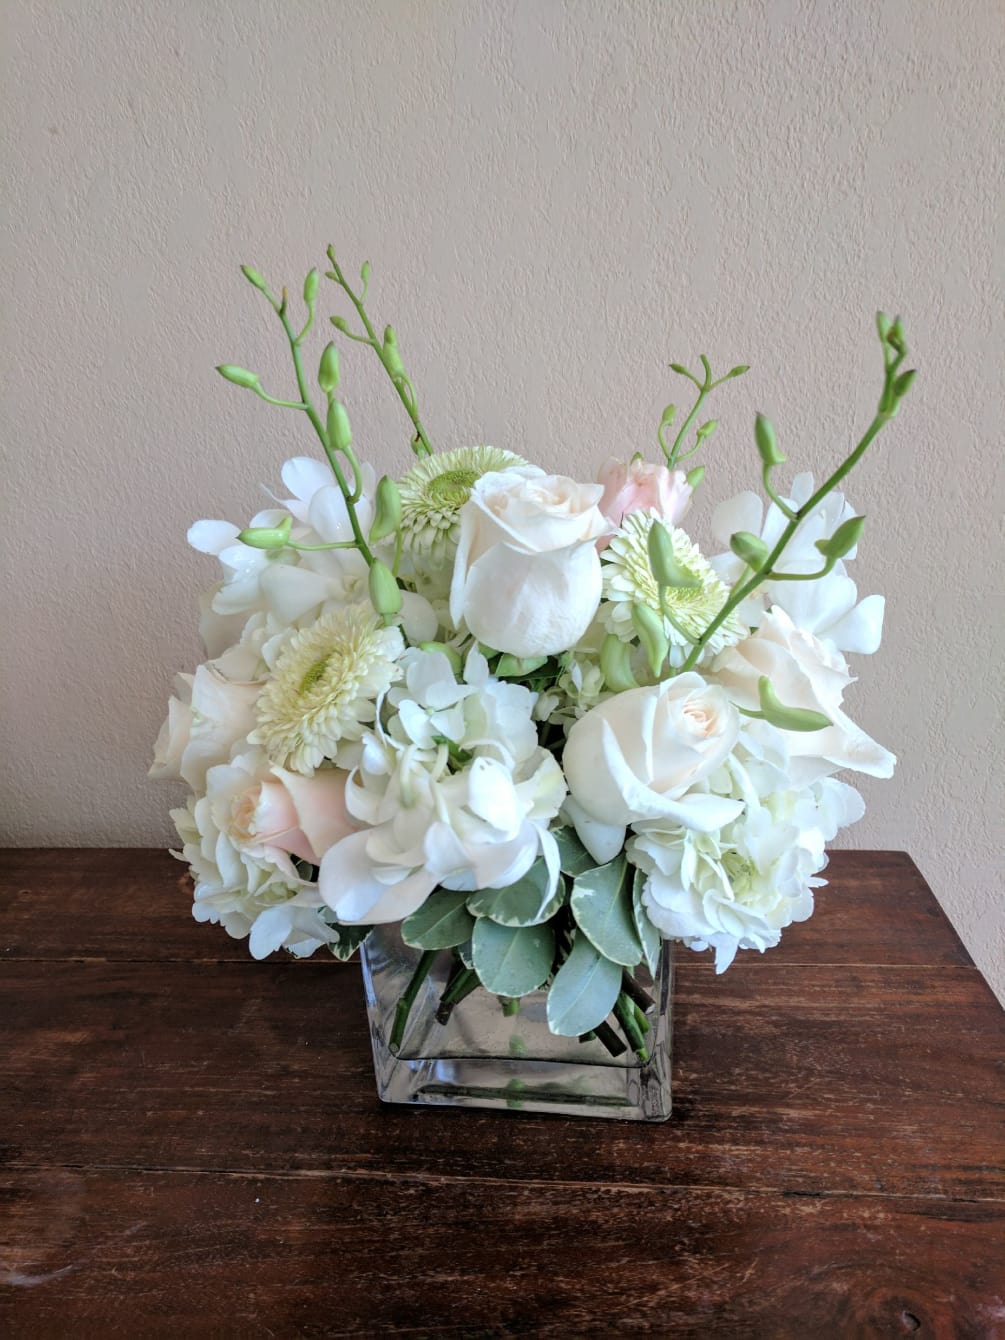 HYDRANGEA , ROSES, DENDROBIUM ORCHIDS AND GERBER DAISES ARRANGED IN A SQUARE